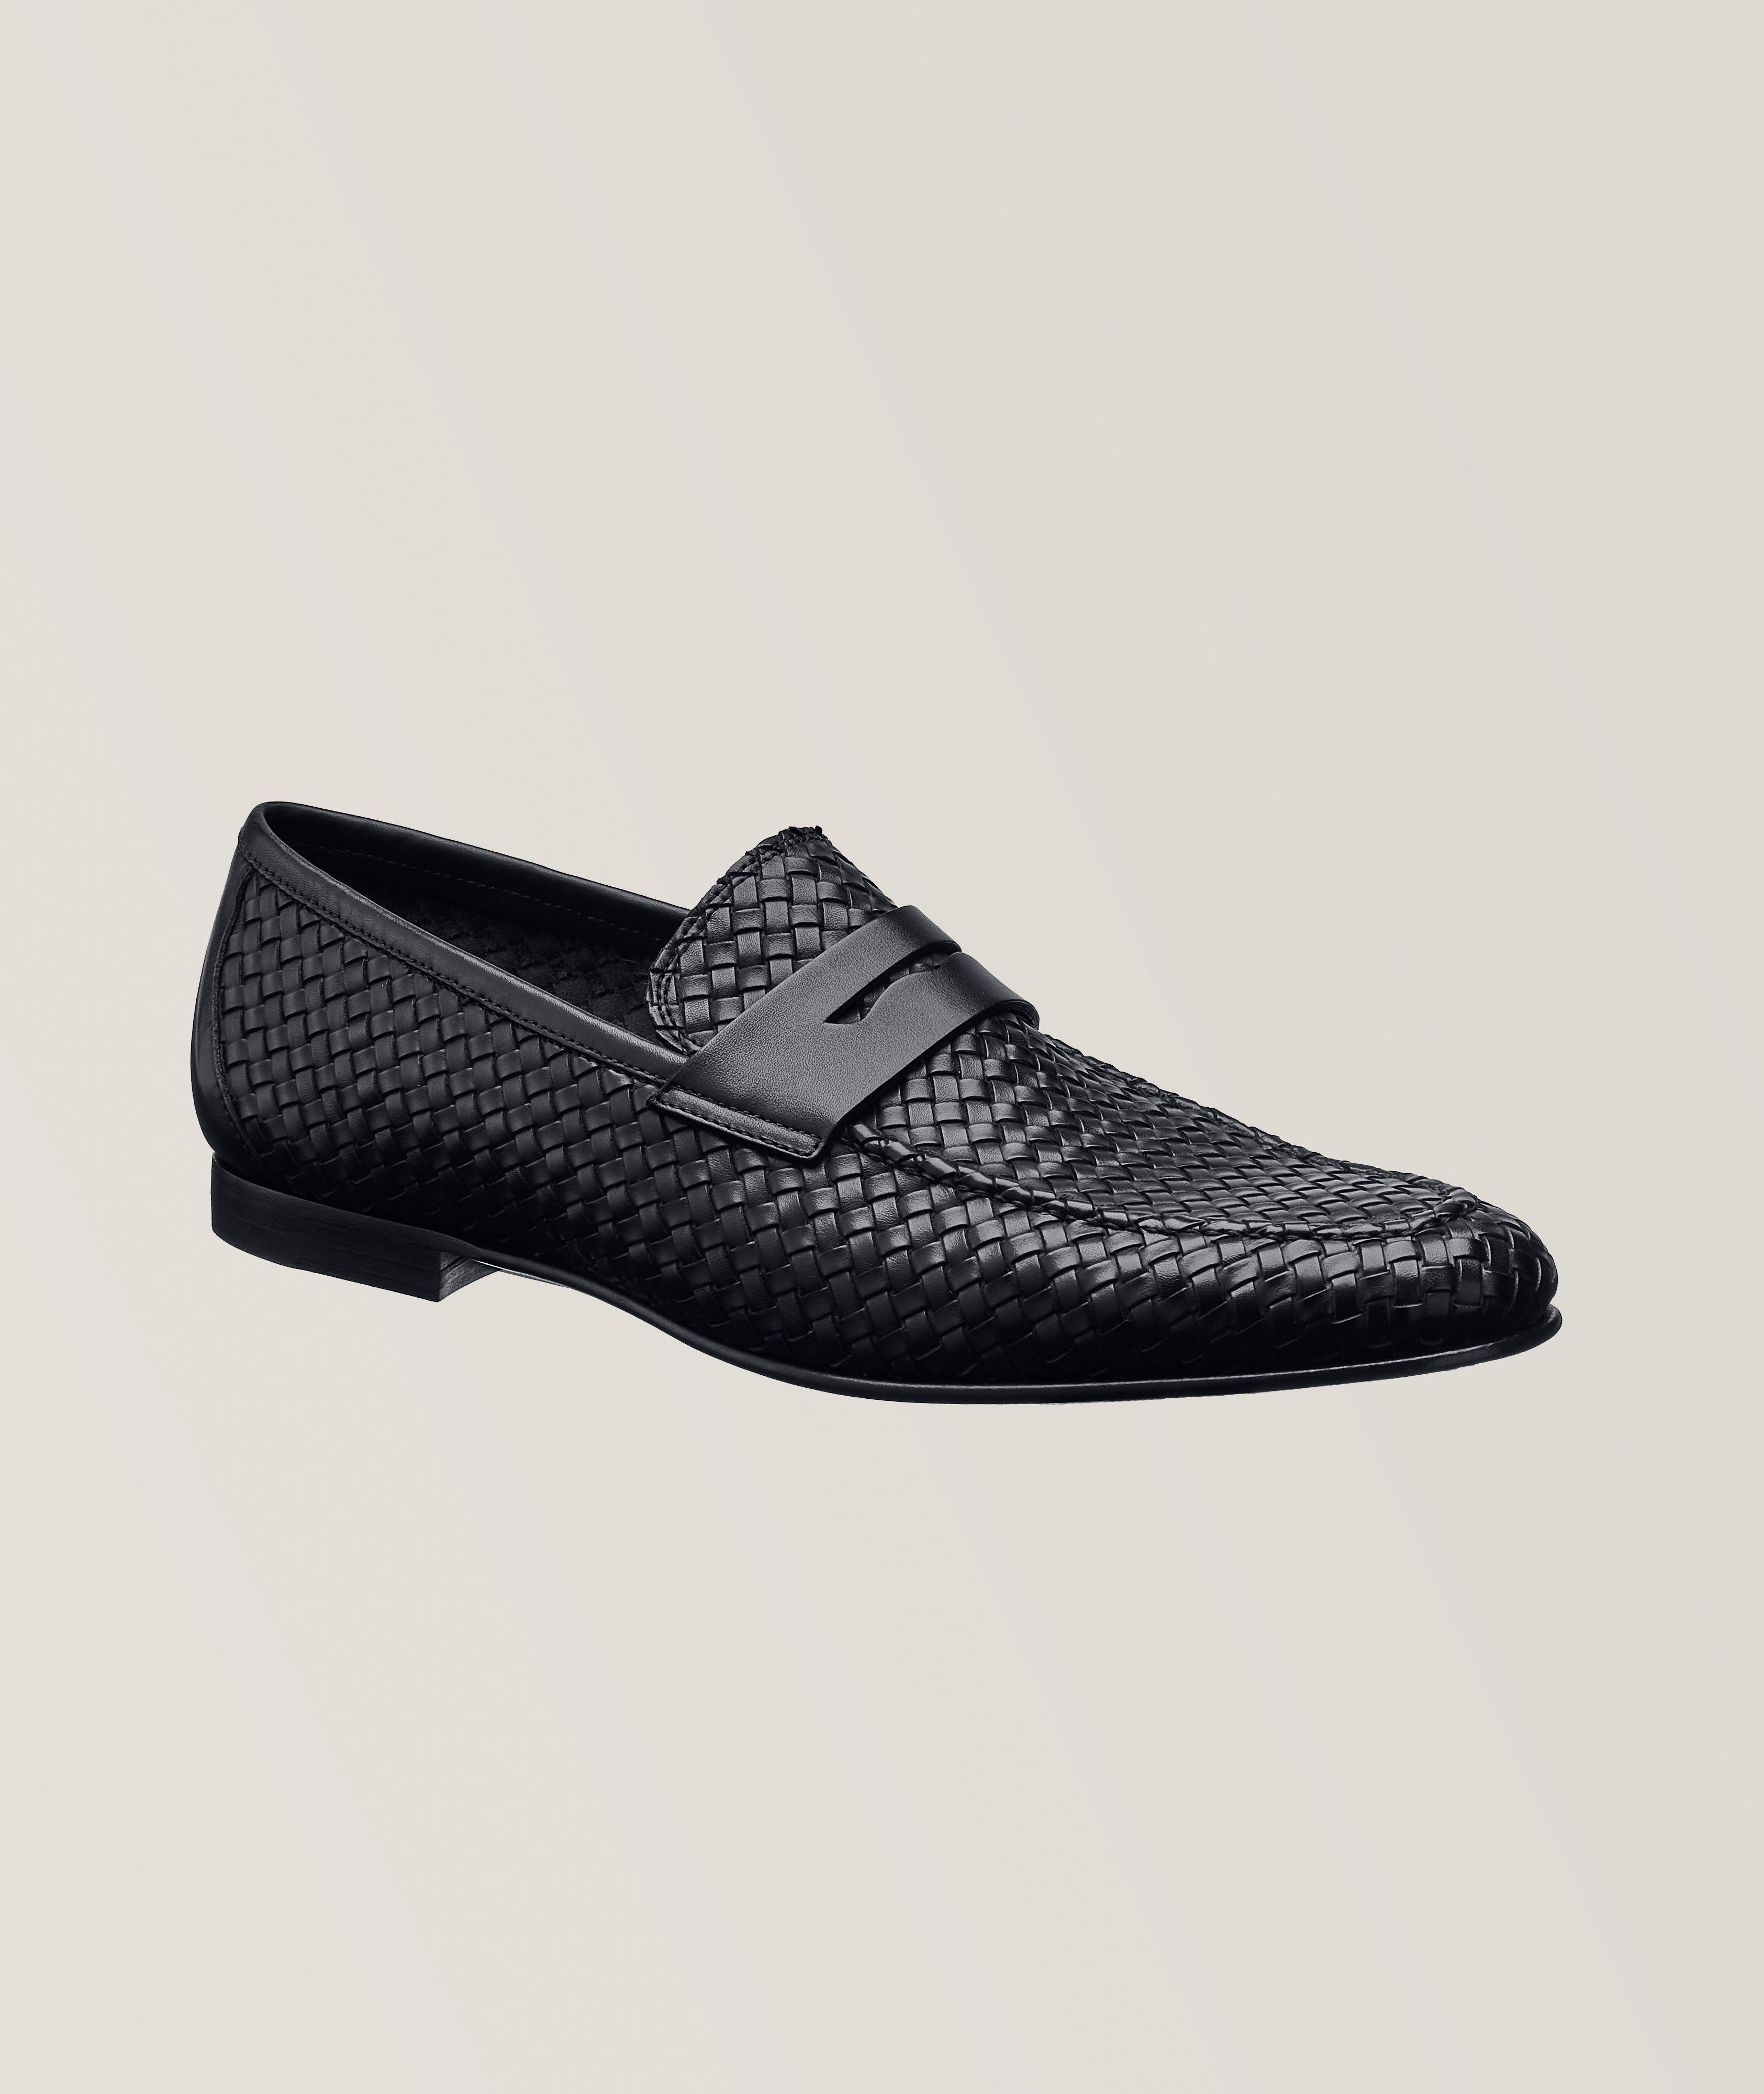 Zenith Burnished Woven Leather Penny Loafers image 0